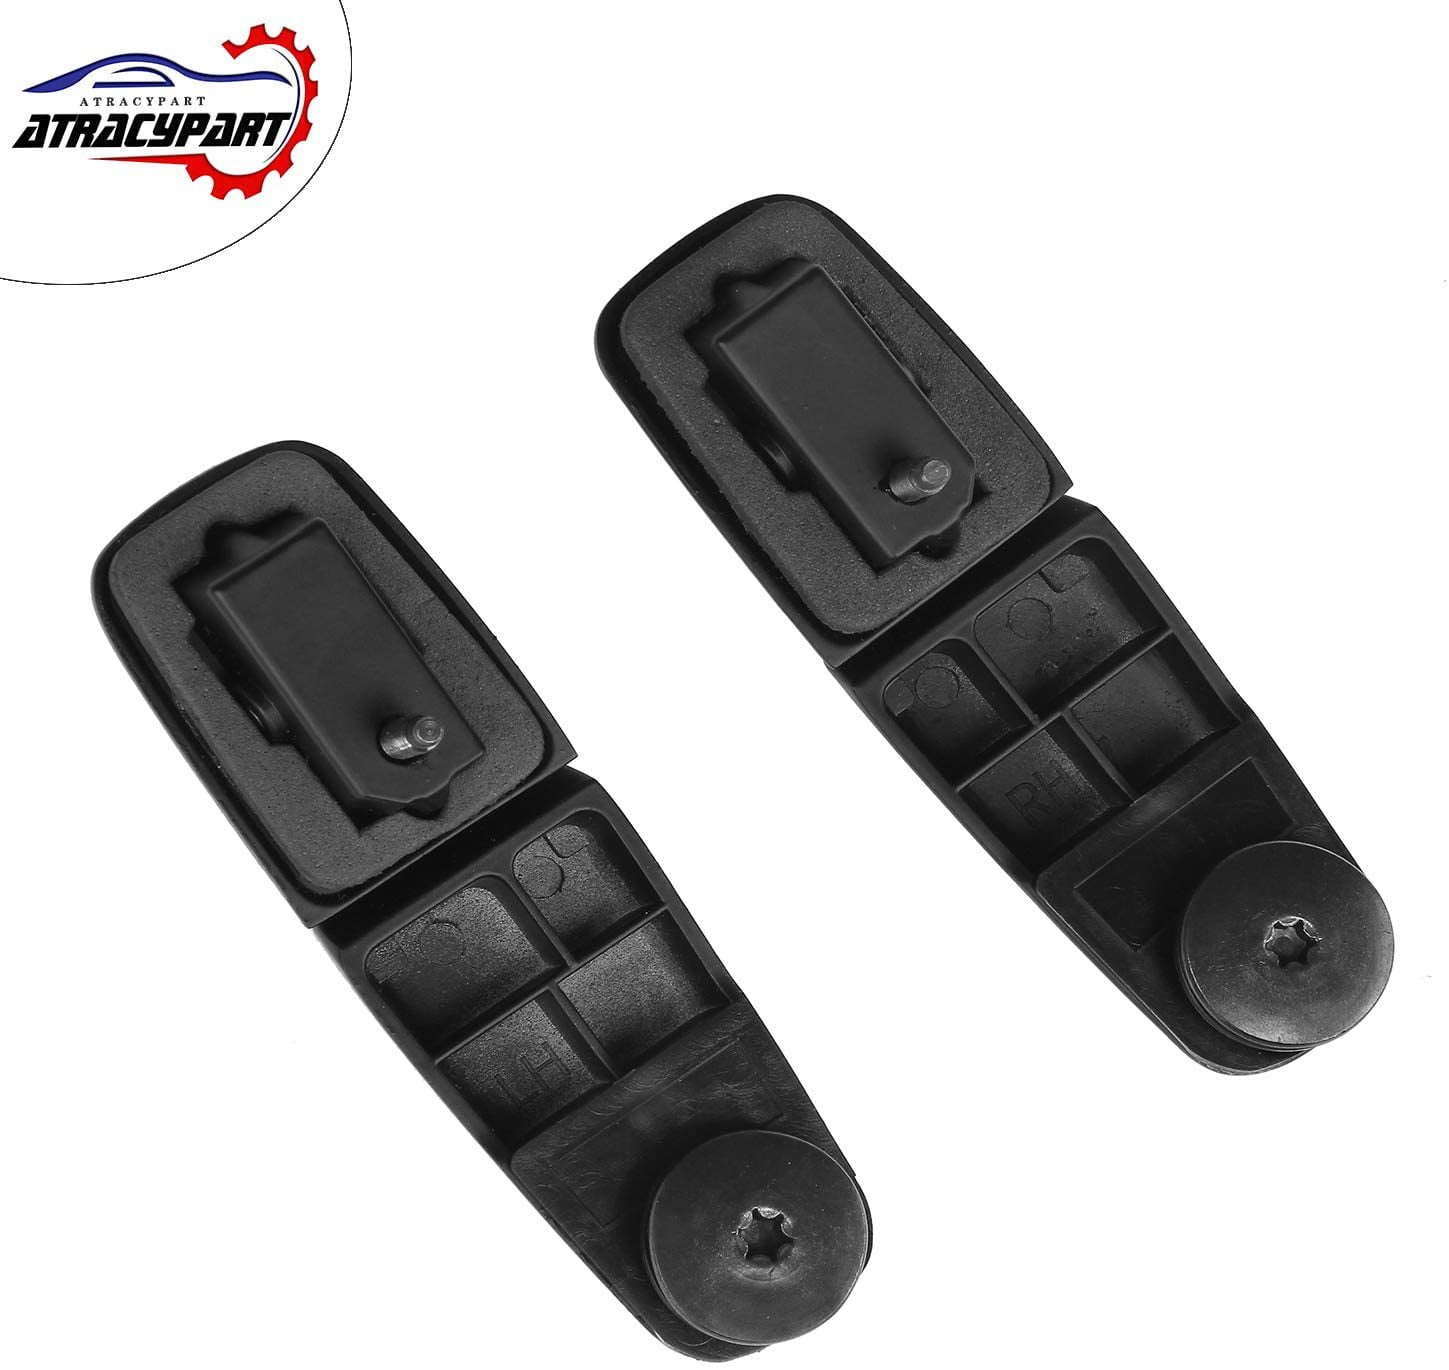 Hedday Rear Window Hinge Liftgate Glass Hinge Set Compatible with 2001-2007 Ford Escape 2005-2007 Mercury Mariner,Replacement for YL8Z78420A68BA YL8Z78420A69BA 